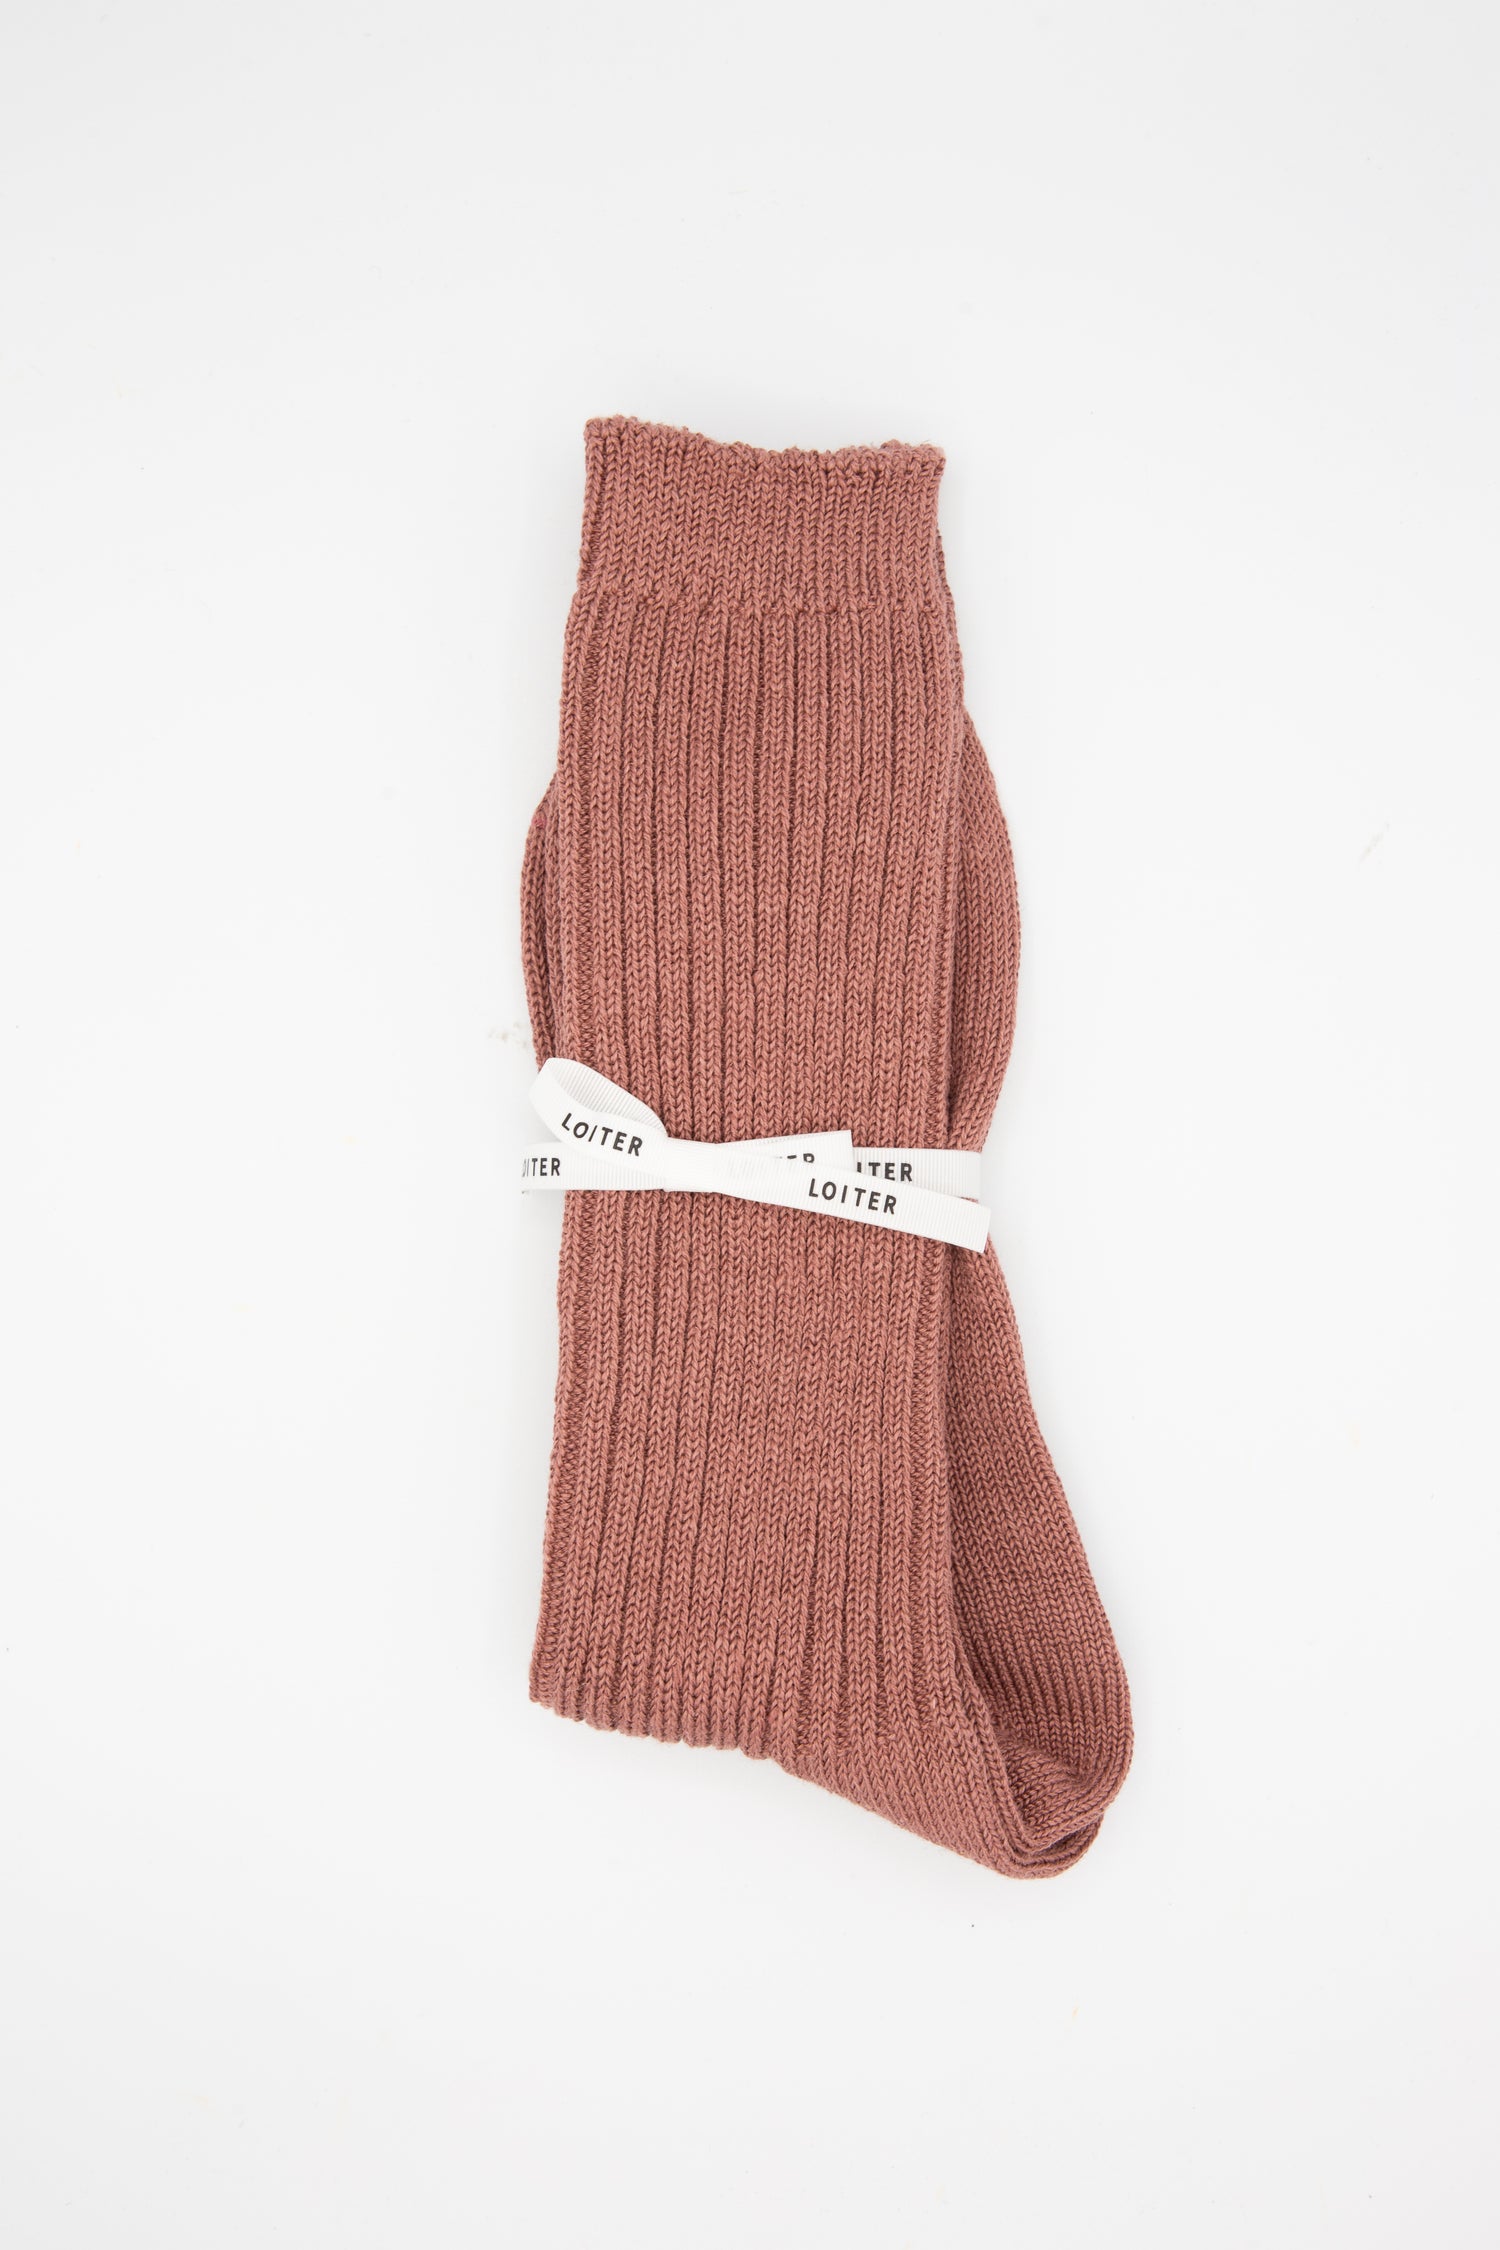 A pair of Linen Rib Sock in Smoke Pink, delicately crafted by Ichi Antiquités in Japan, showcased against a pure white background.